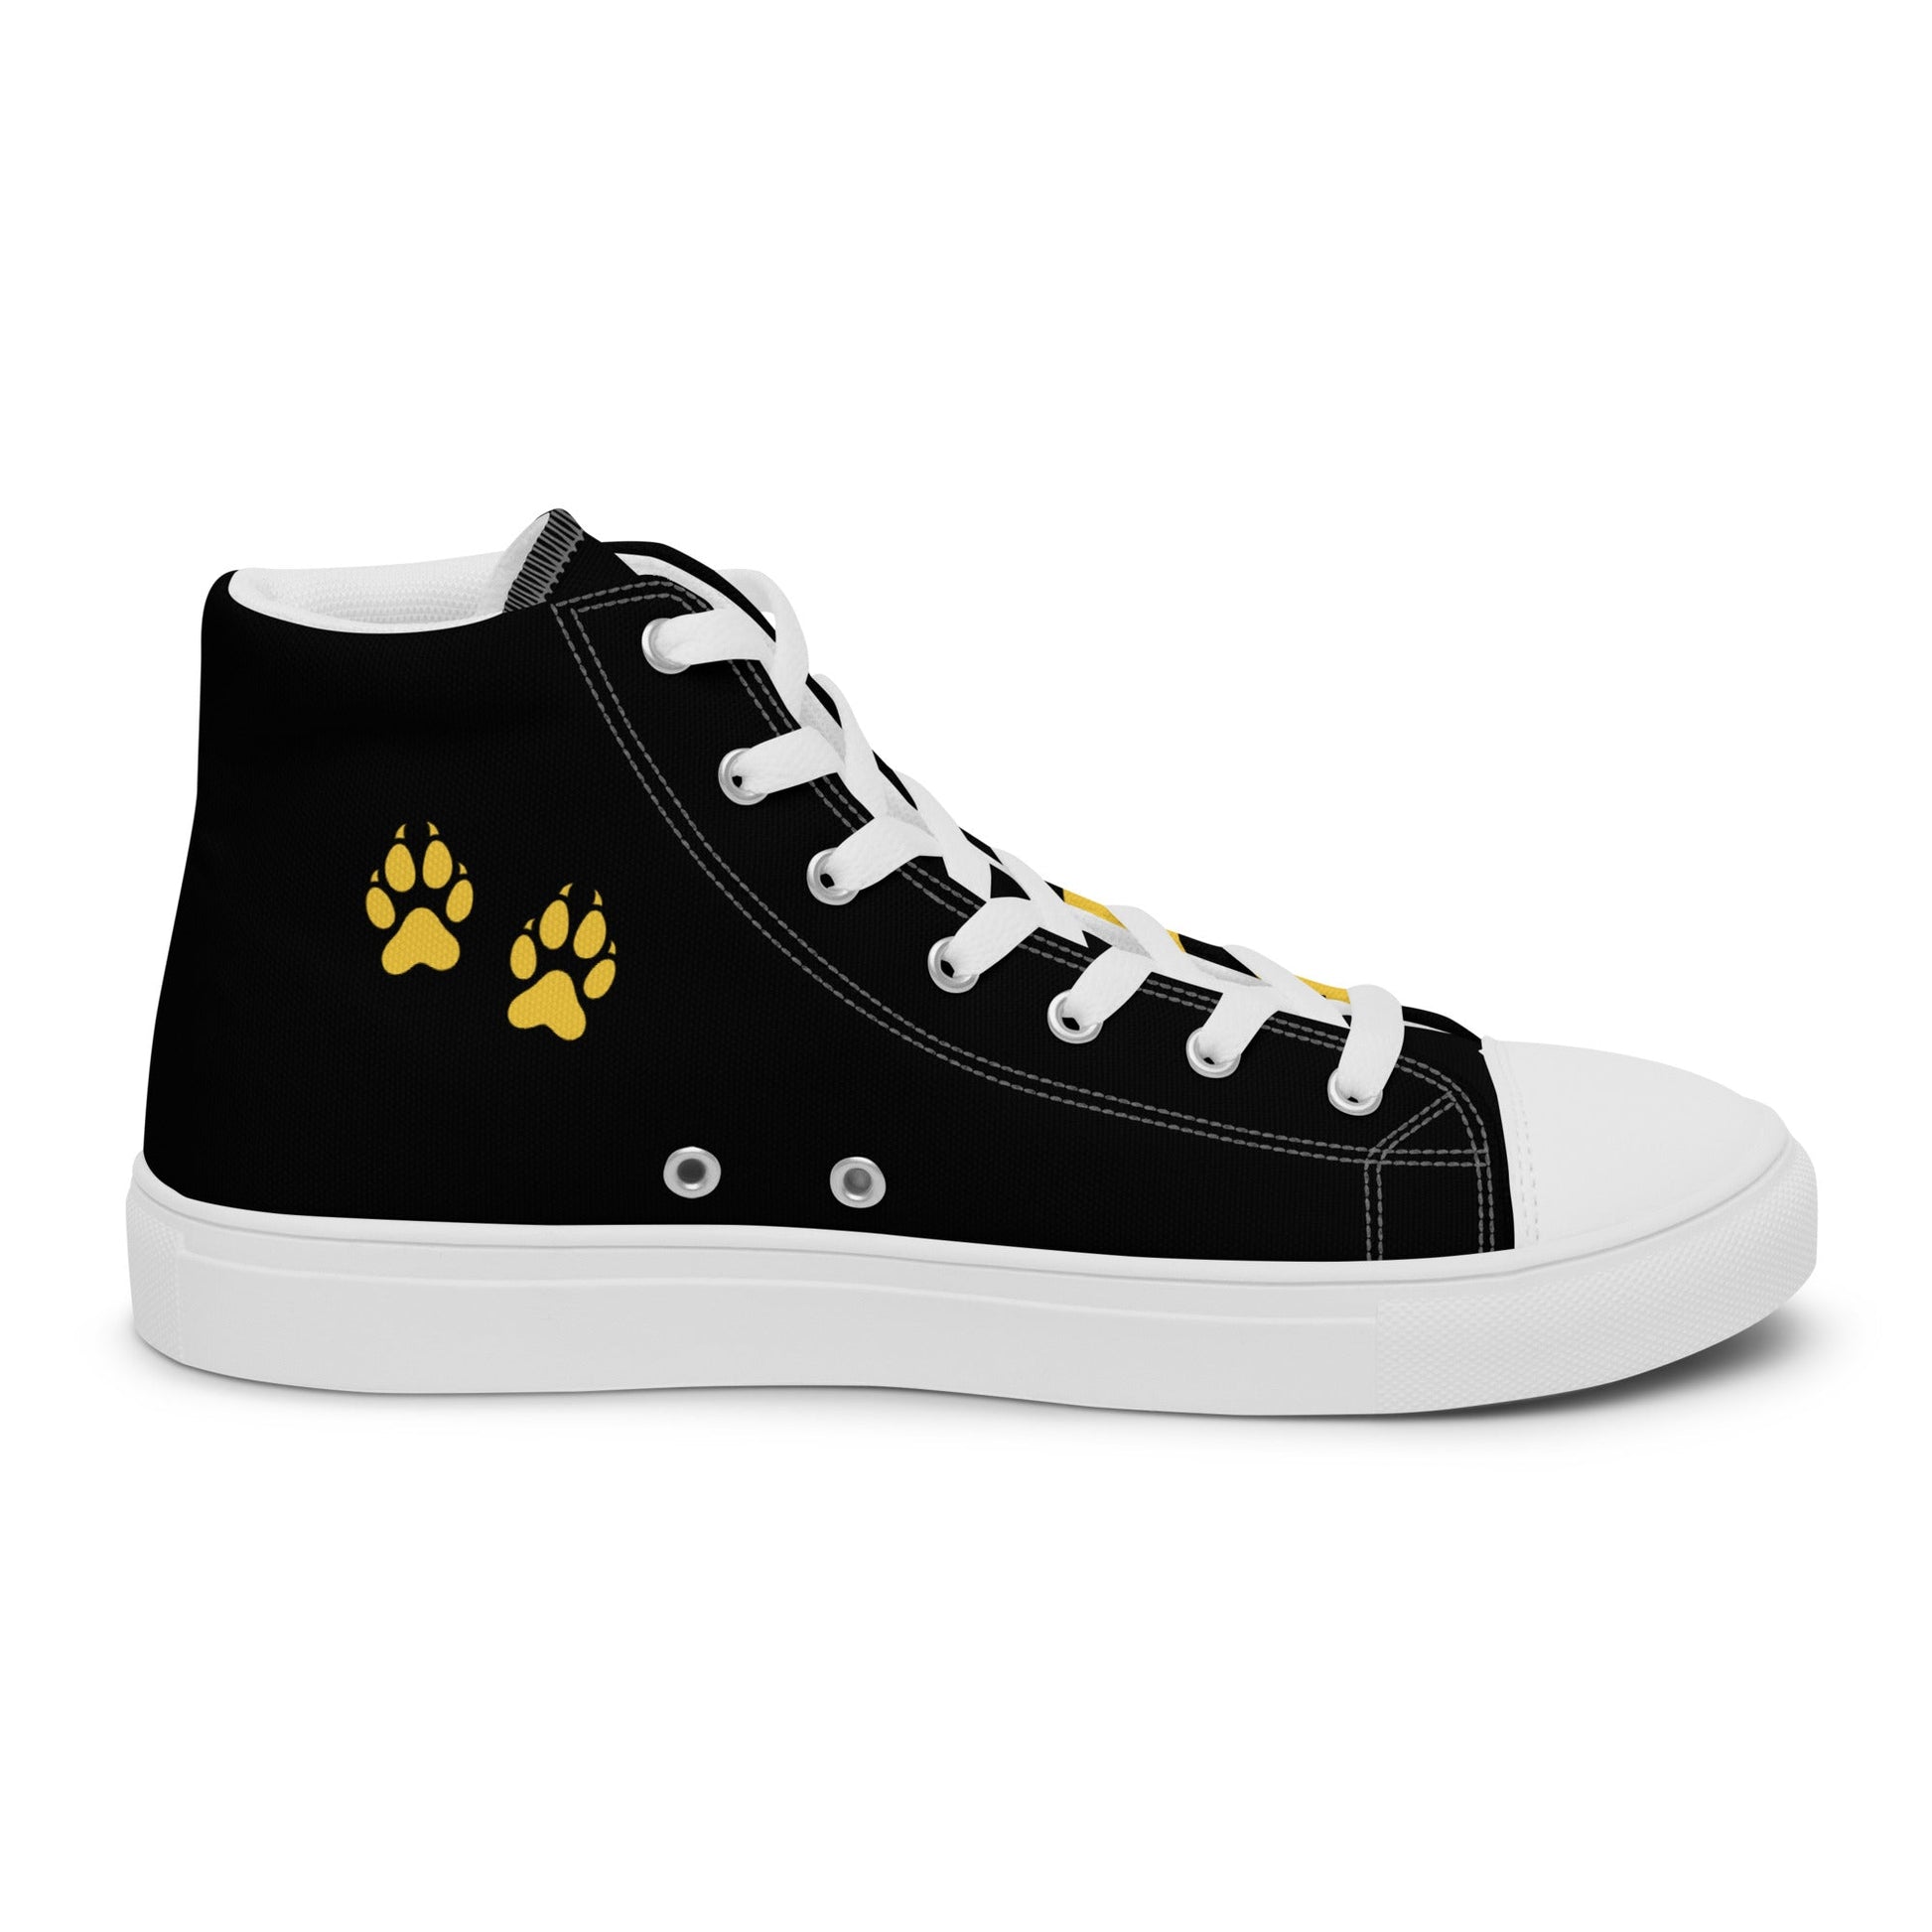 Men's Wolf Dog Sneakers-DoggyLoveandMore